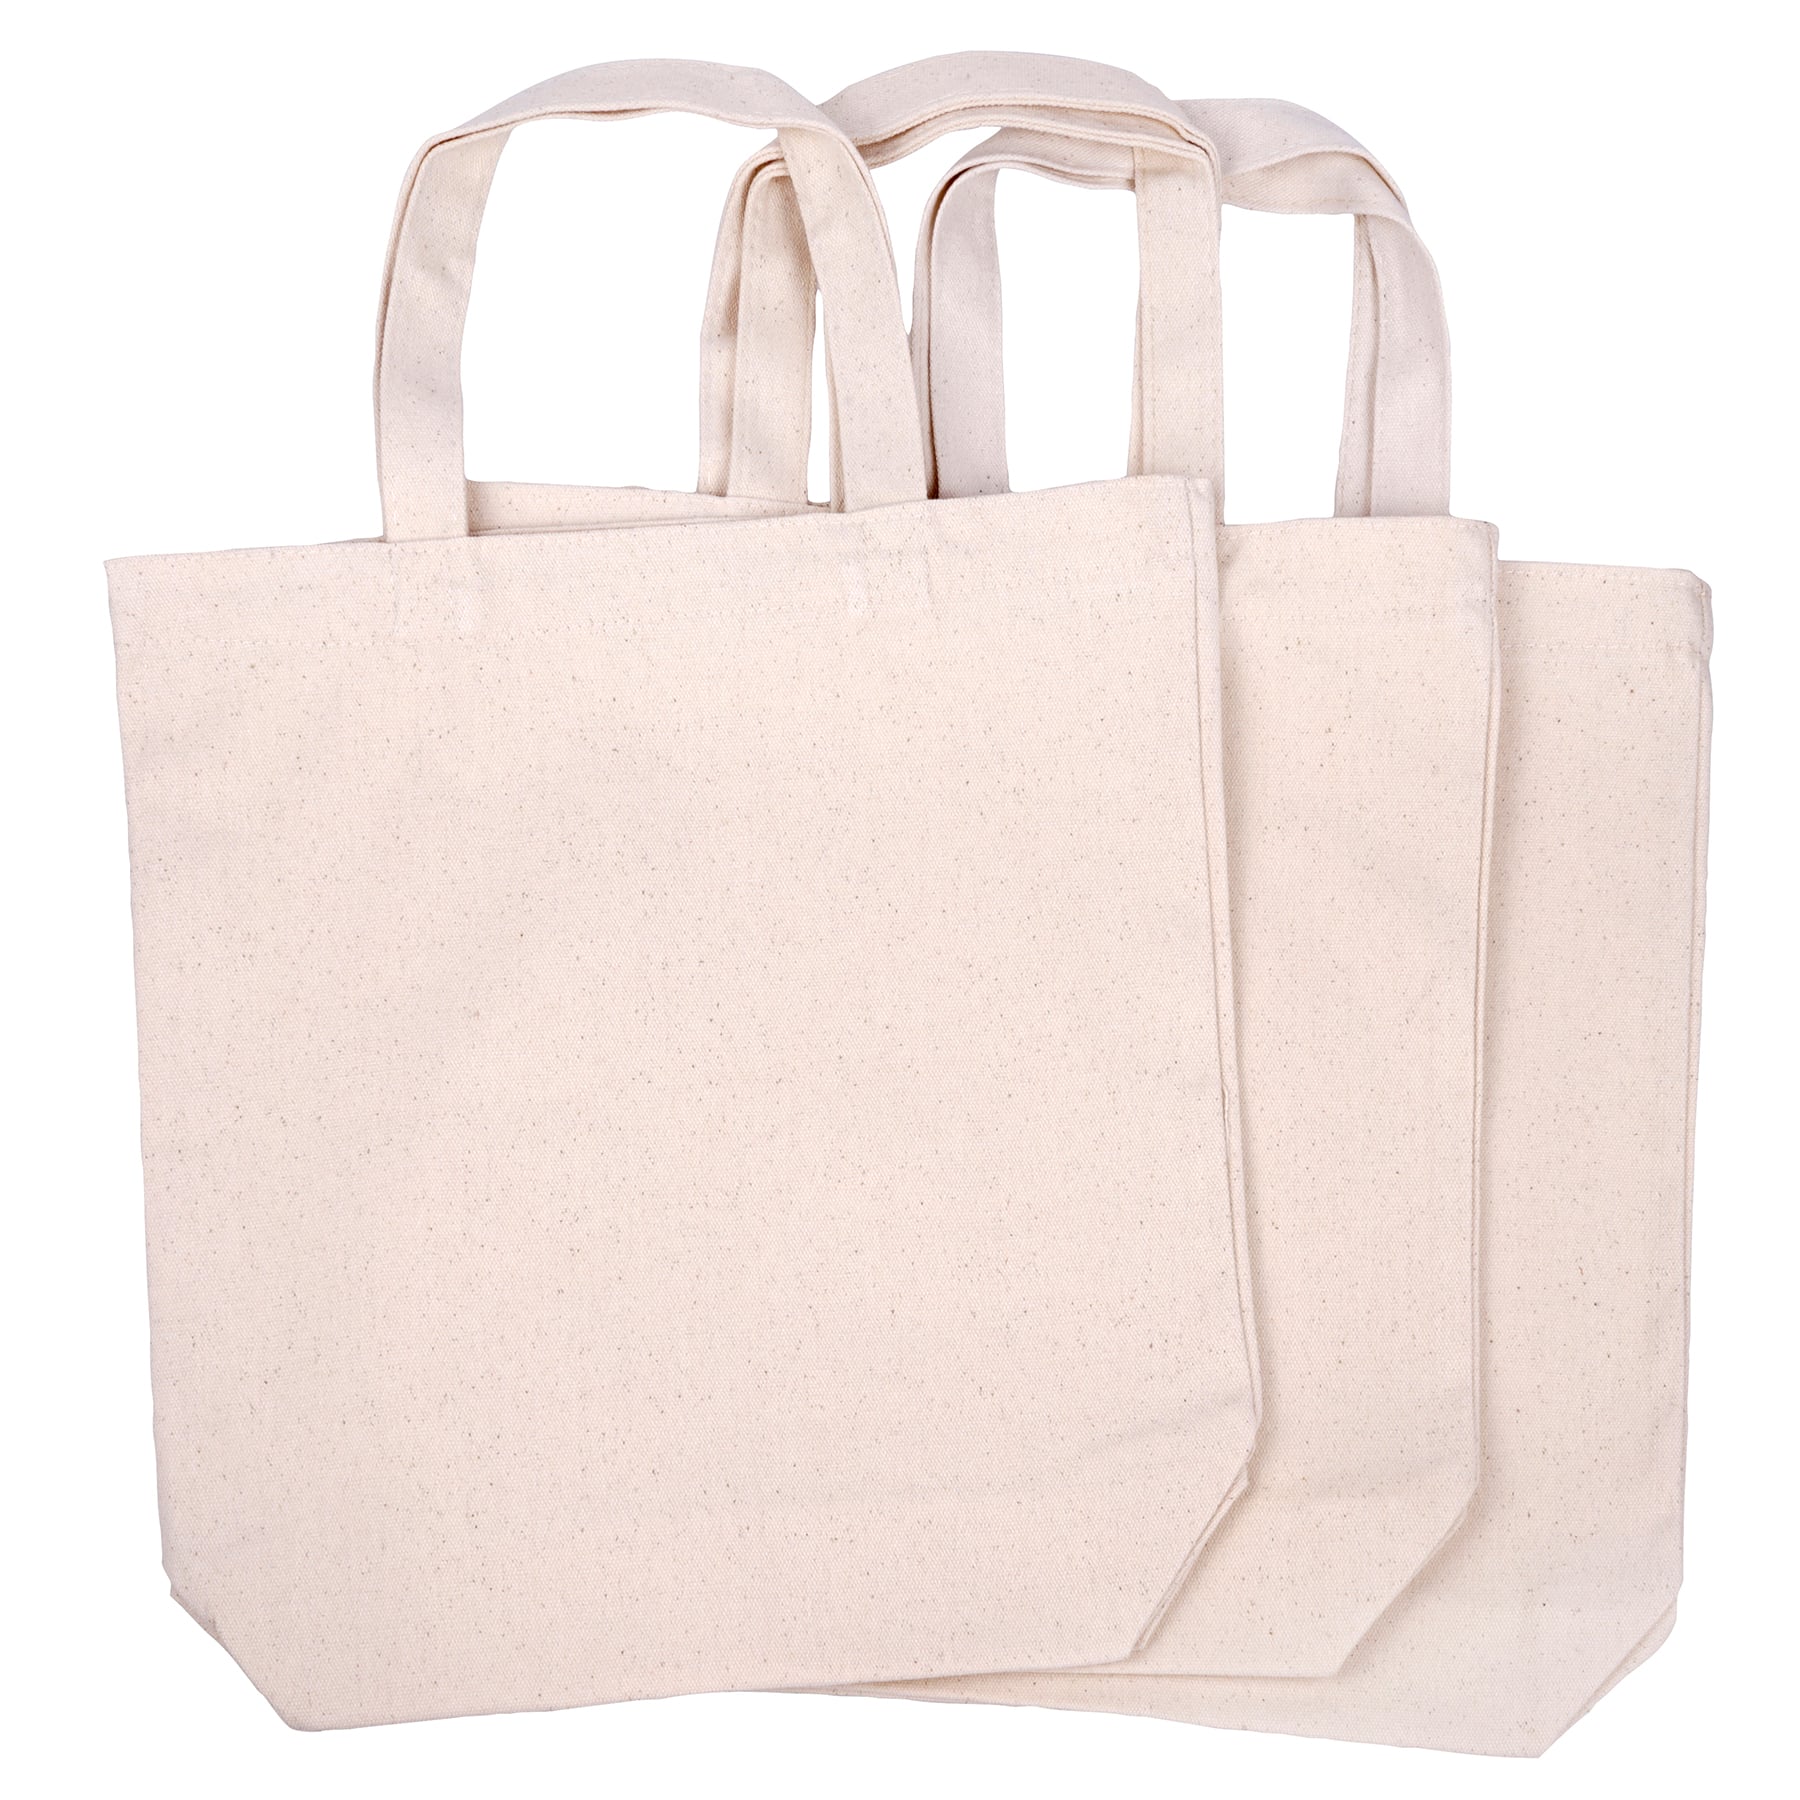 12 Packs: 3 ct. (36 total) Natural Cotton Tote Bags by Make Market&#xAE;